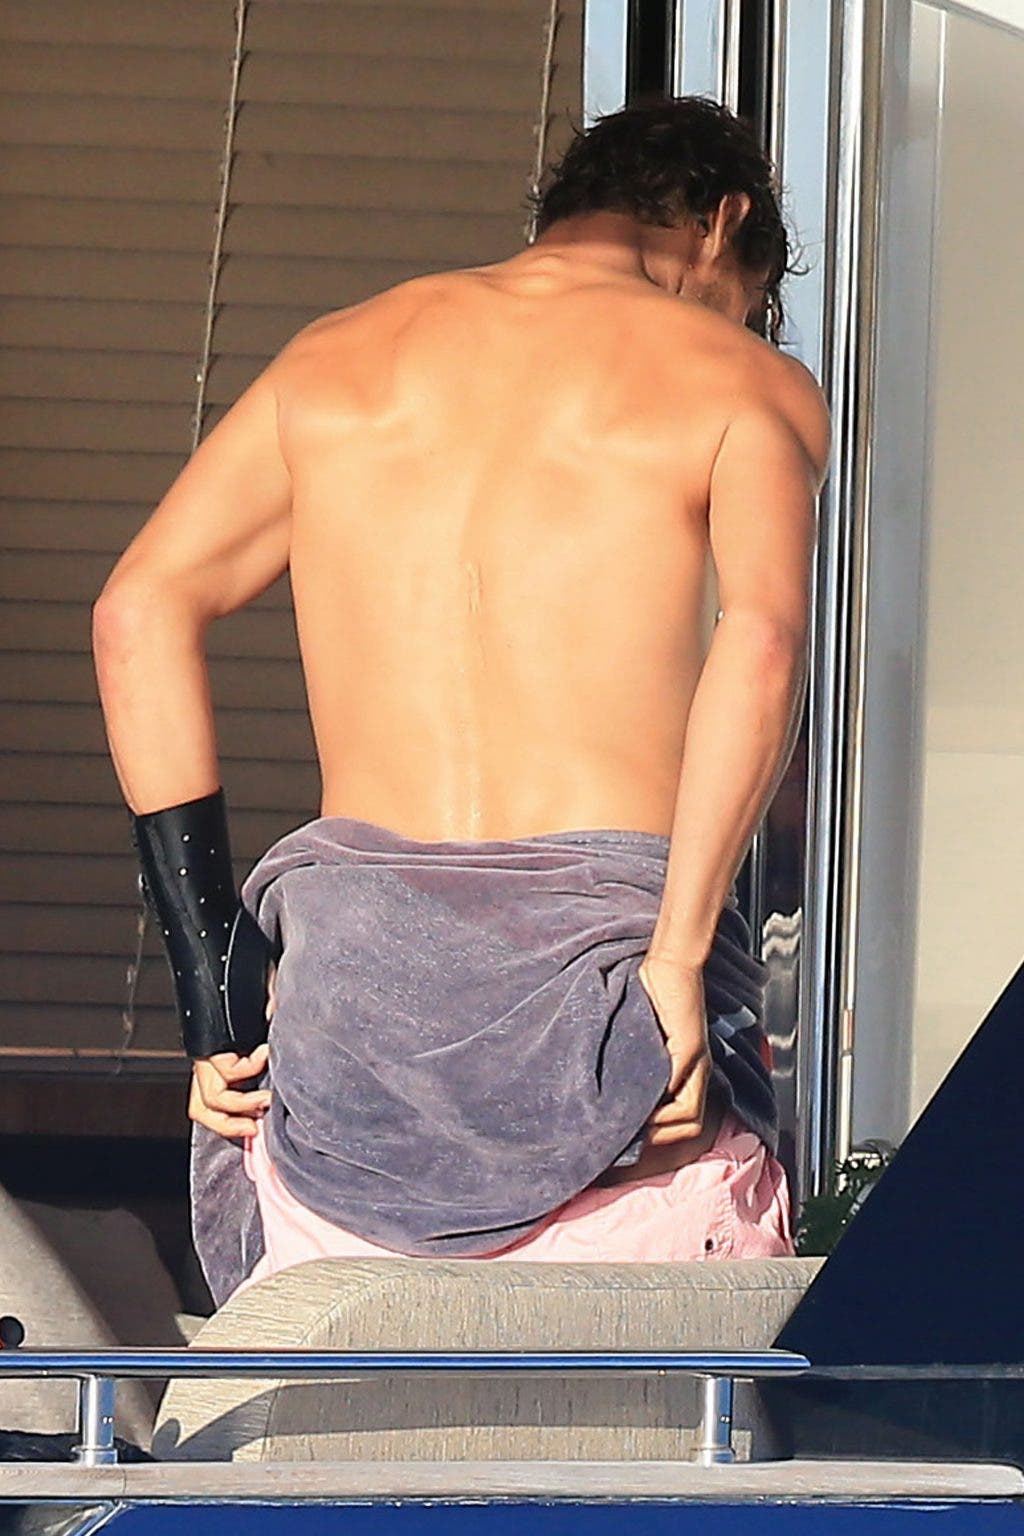 Exclusive... 52107231 Tennis star Rafael Nadal is spotted showing off his butt while changing on a yacht during his vacation in Ibiza, Spain on June 23, 2016. FameFlynet, Inc - Beverly Hills, CA, USA - +1 (310) 505-9876 RESTRICTIONS APPLY: USA/AUSTRALIA ONLY